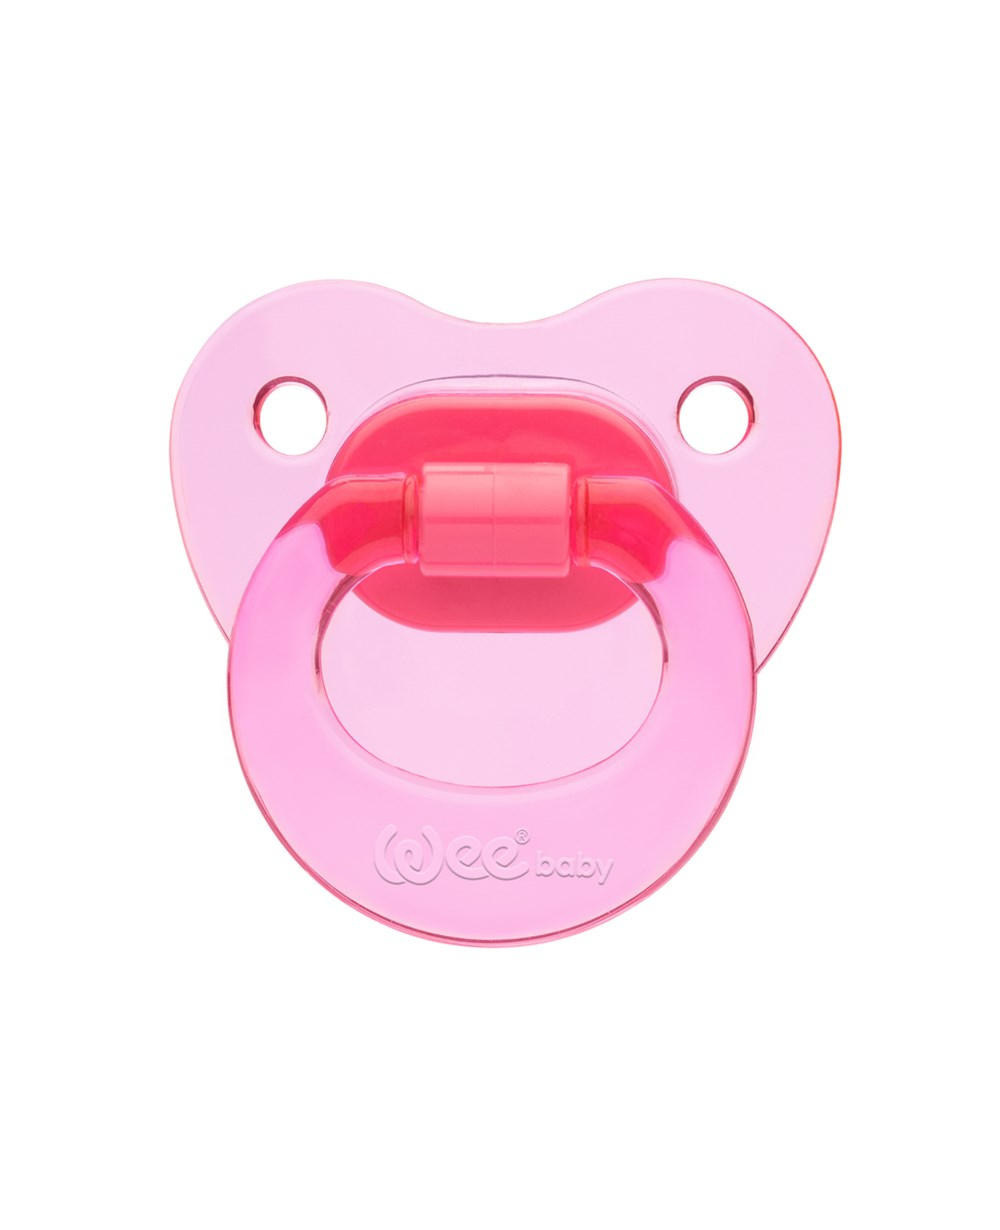 weebaby silicone activate pacifier NO.2 pink